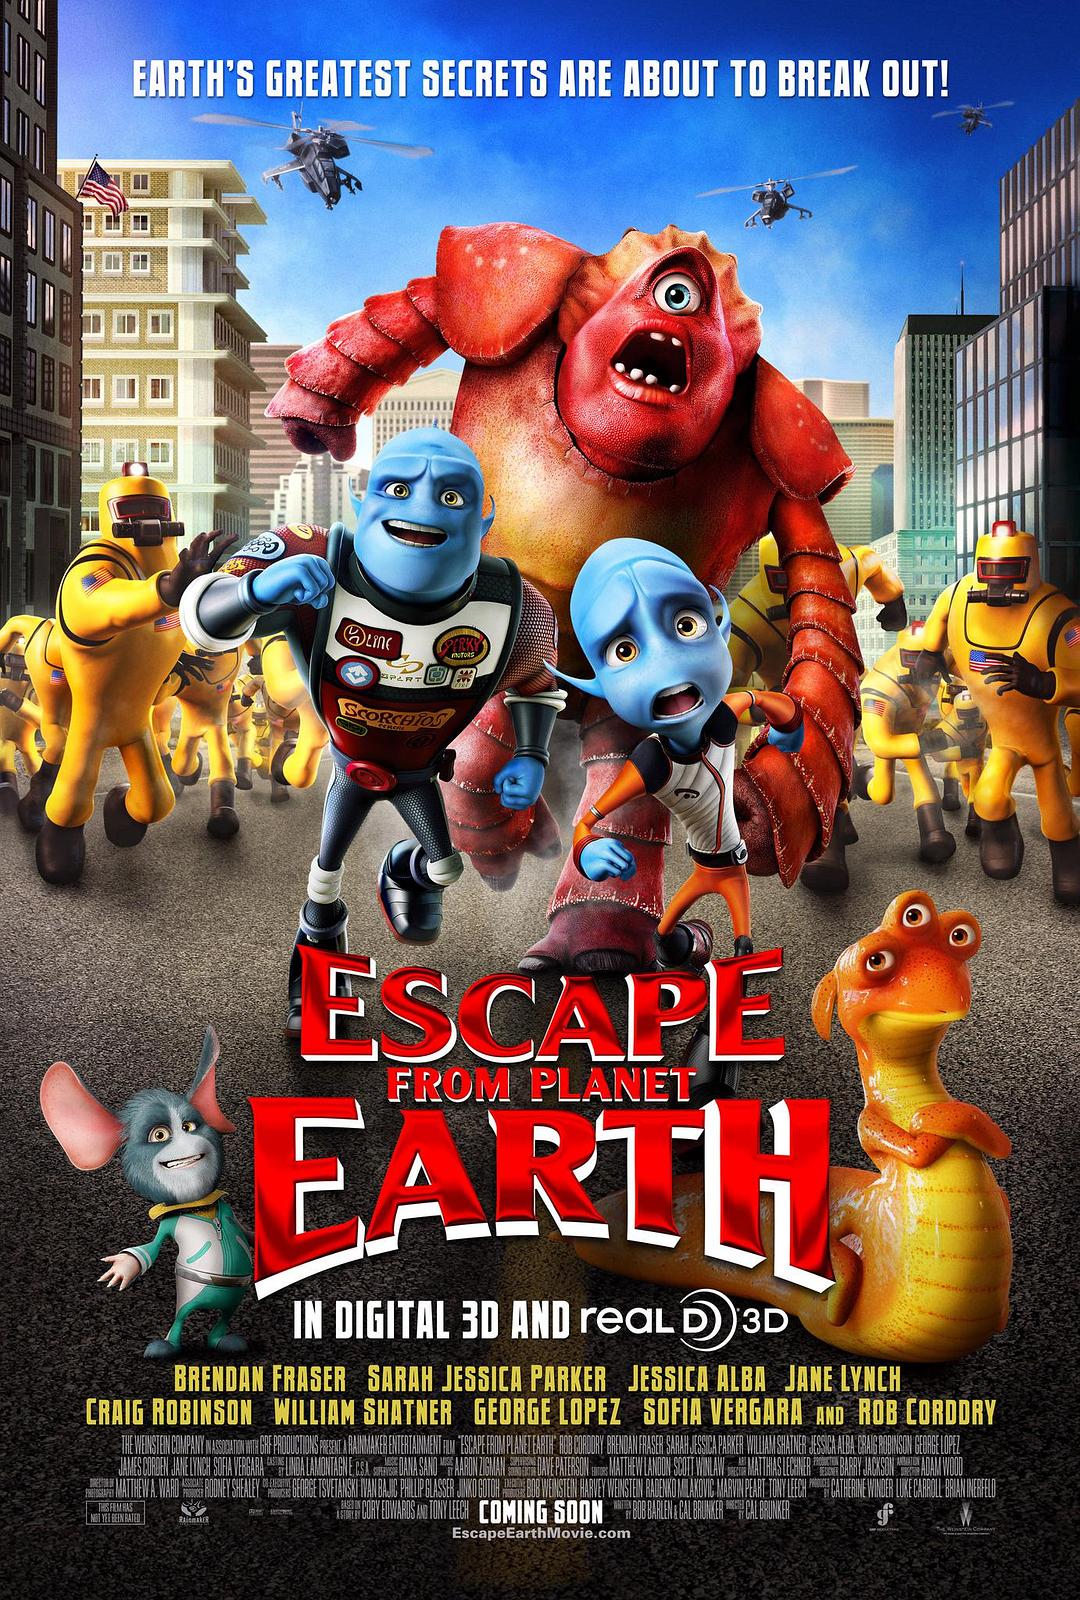 /˻ Escape.from.Planet.Earth.2013.1080p.BluRay.x264-SPARKS 4.37GB-1.png